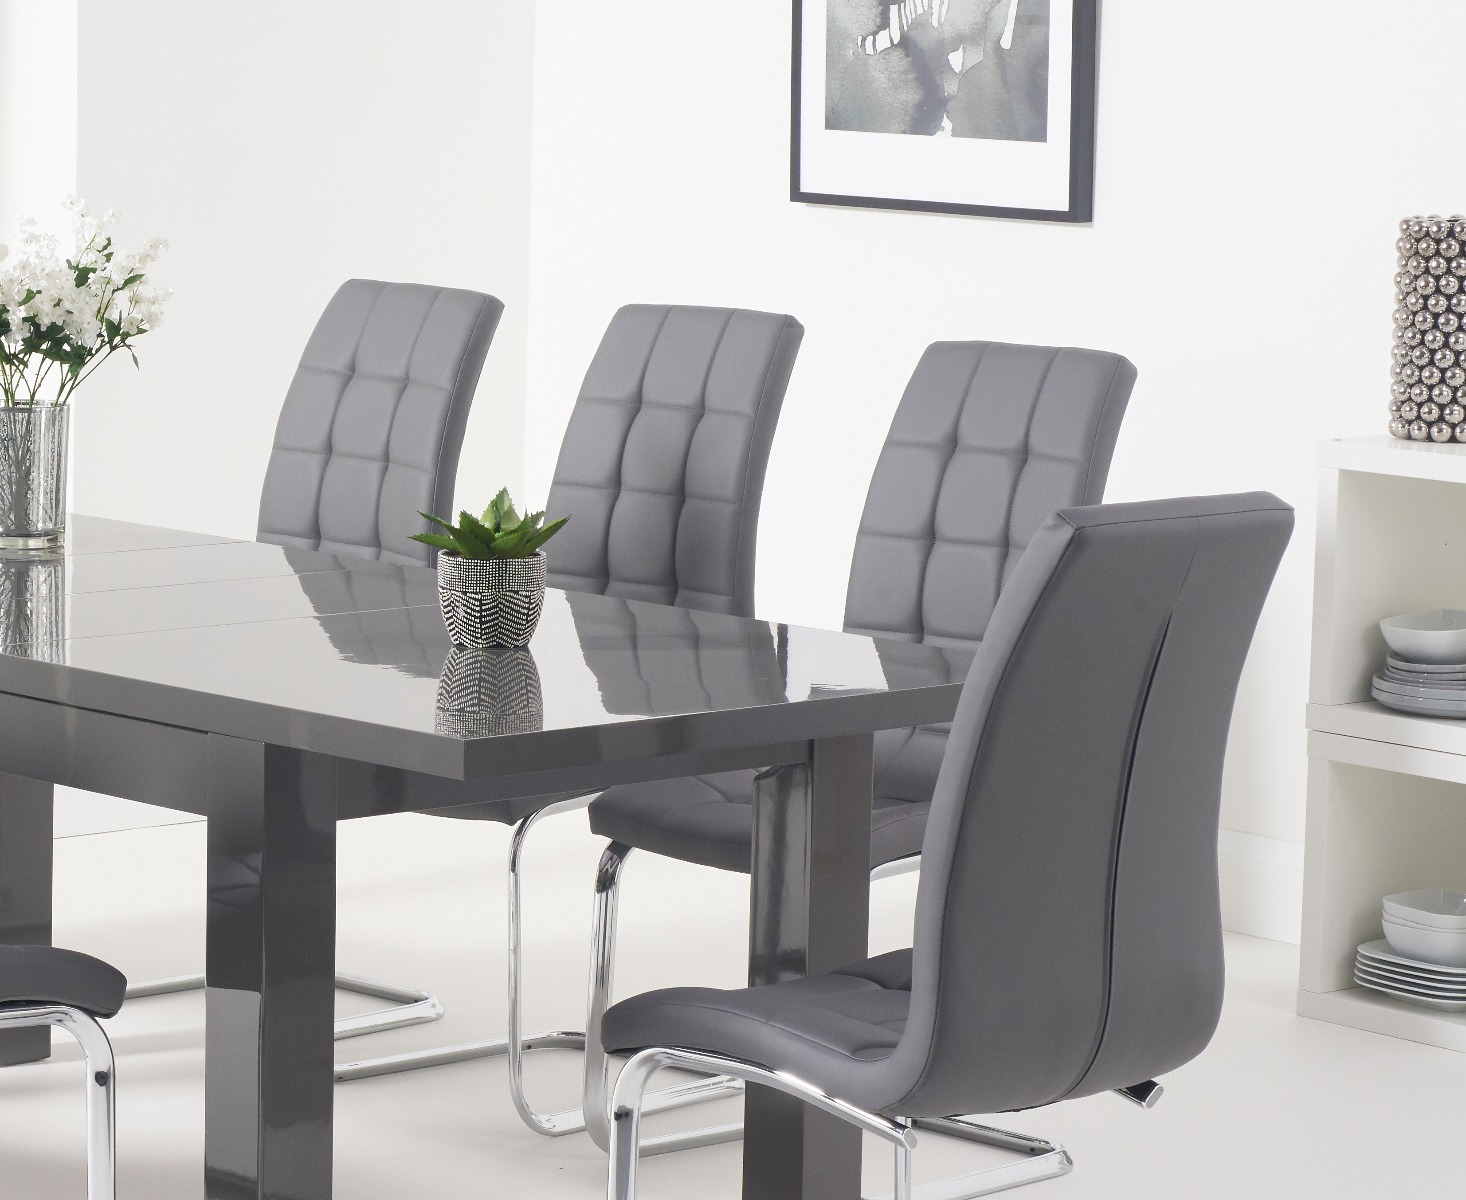 Photo 2 of Extending seattle 160cm dark grey high gloss dining table with 4 grey vigo chairs